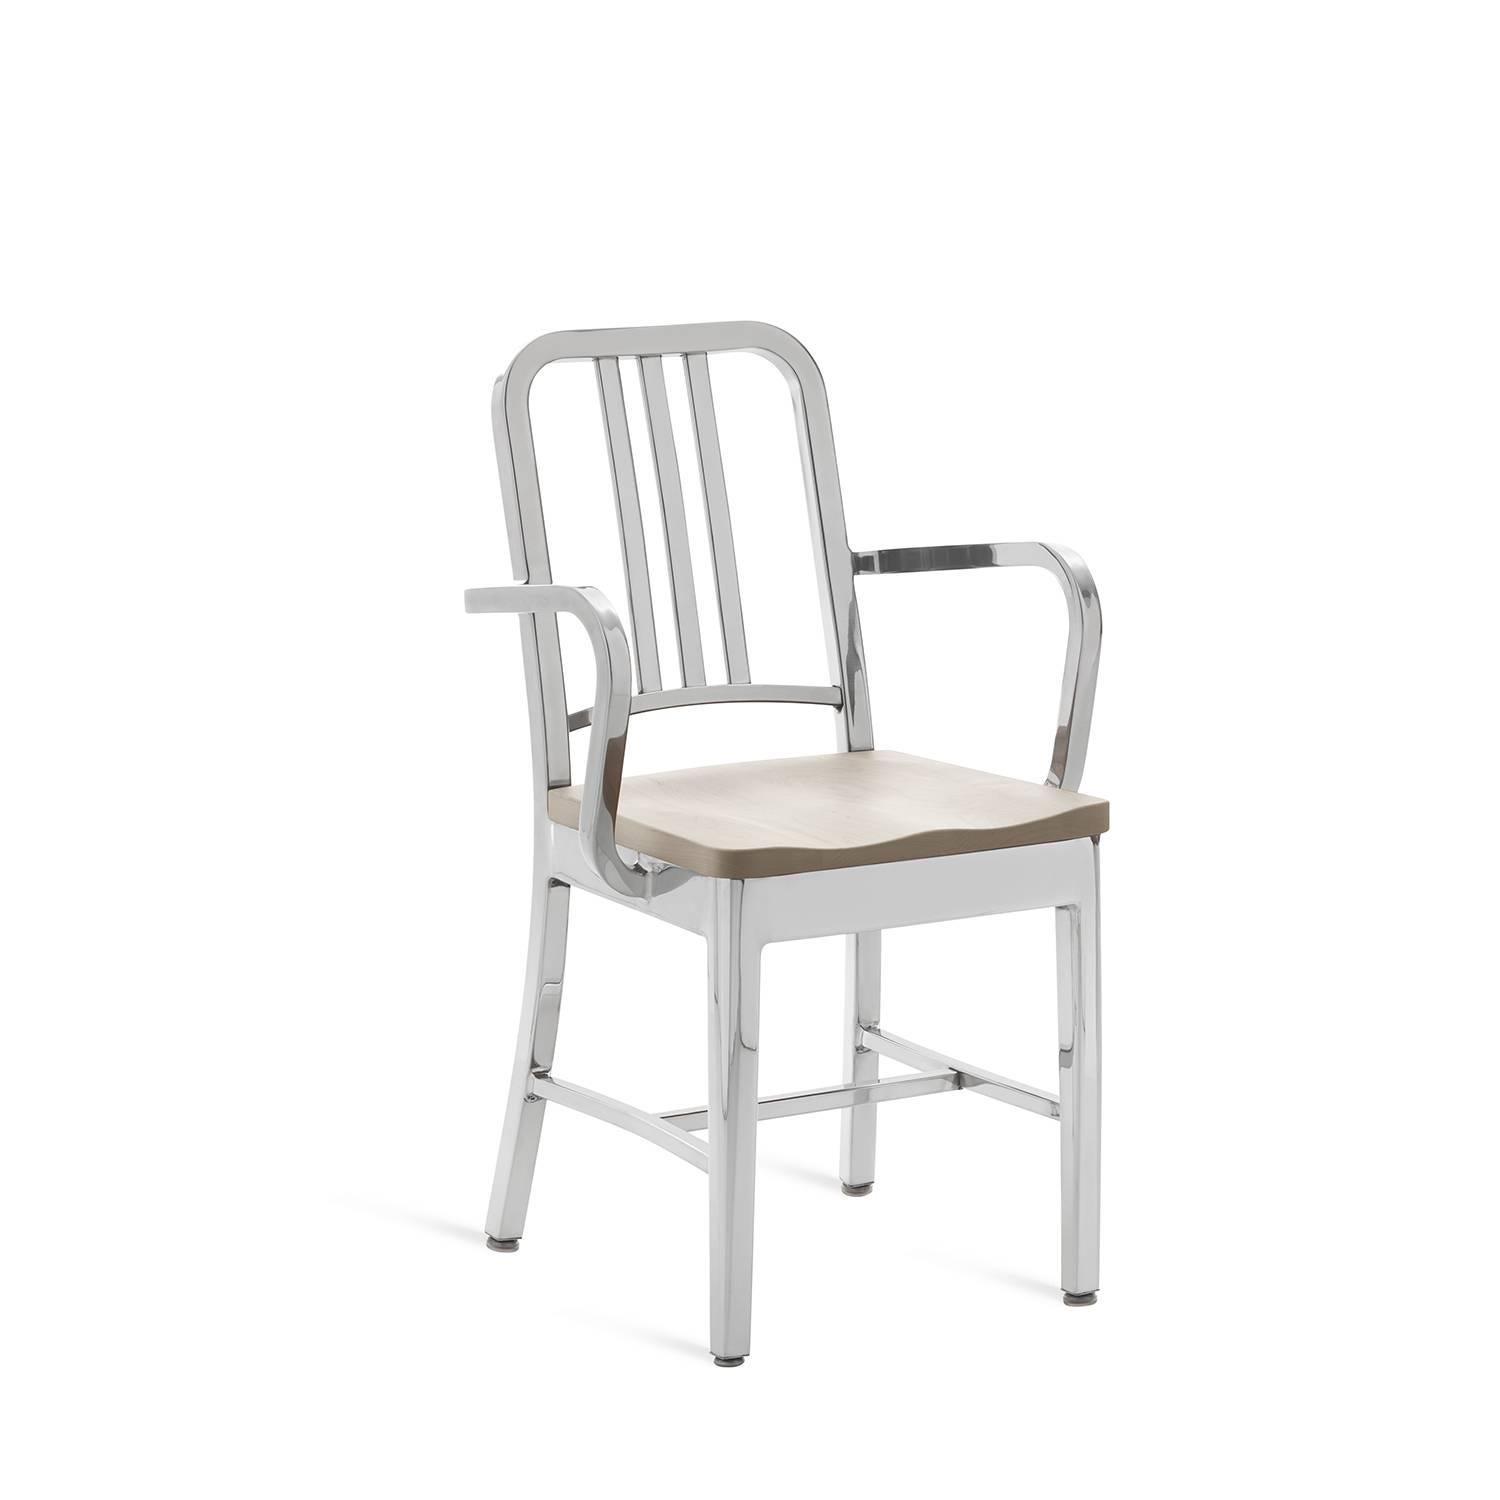 First built for use on submarines in 1944, the Navy chair has been in continuous Production ever since. With the famous 77 step Process, our craftsmen take soft, recycled aluminum, hand form and weld it- then temper it for strength. Finally, the